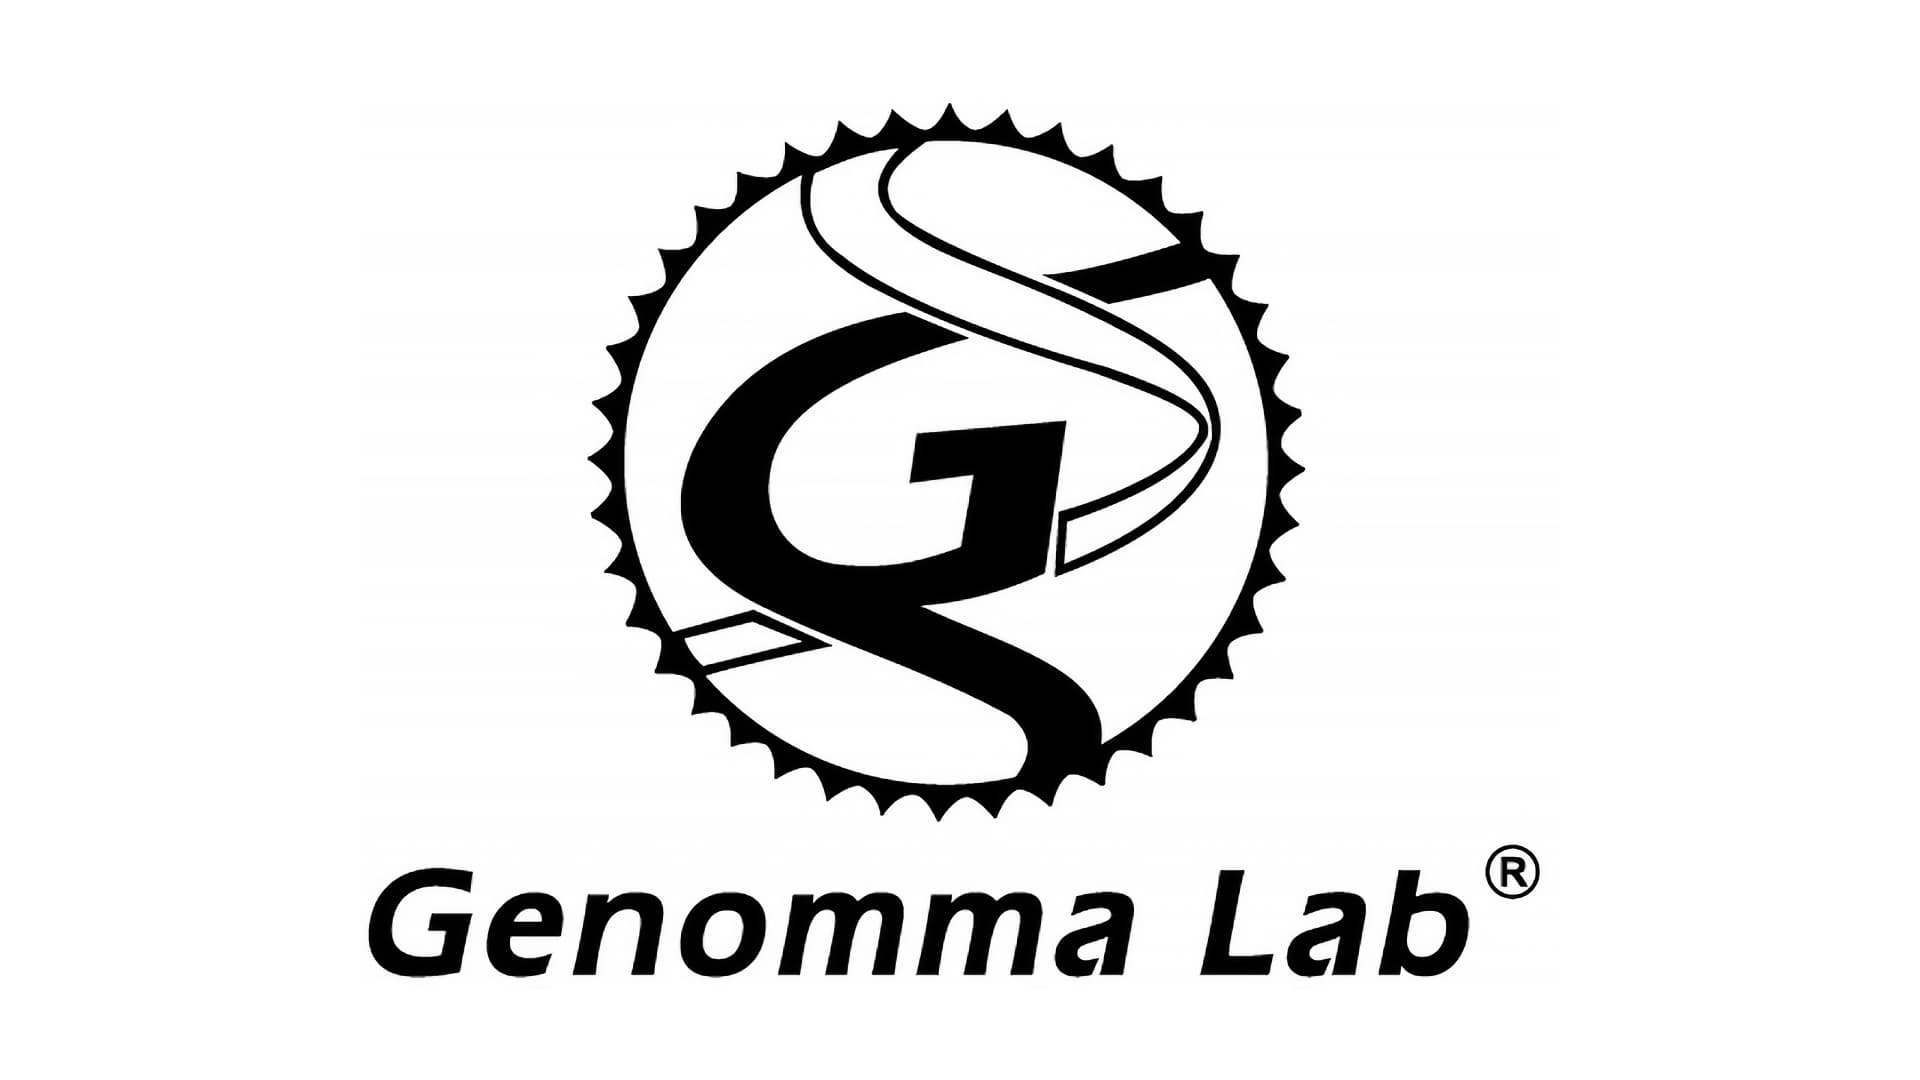 Genomma Lab, the first pharmaceutical company to receive EDGE certification for environmental efficiency in the West